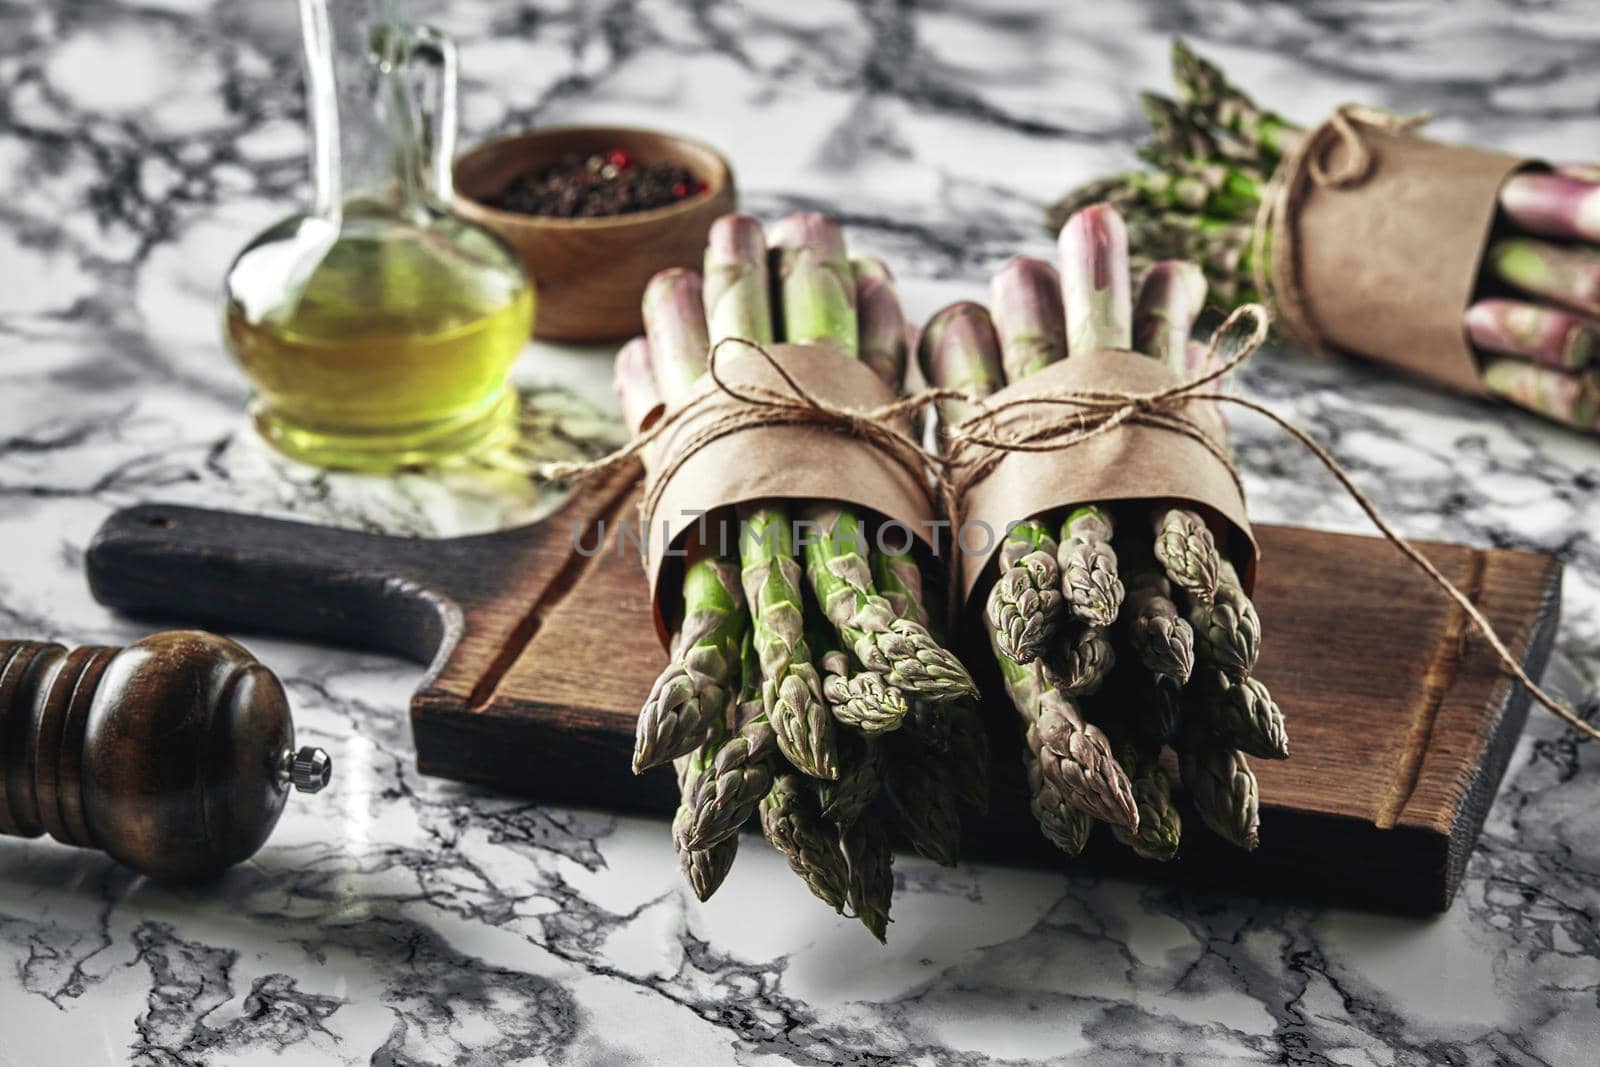 Bunch of an edible, ripe stems of asparagus on a wooden board, marble background. Fresh, green vegetables with olive oil and seasonings, top view. Healthy eating. Spring harvest, agricultural farming concept.